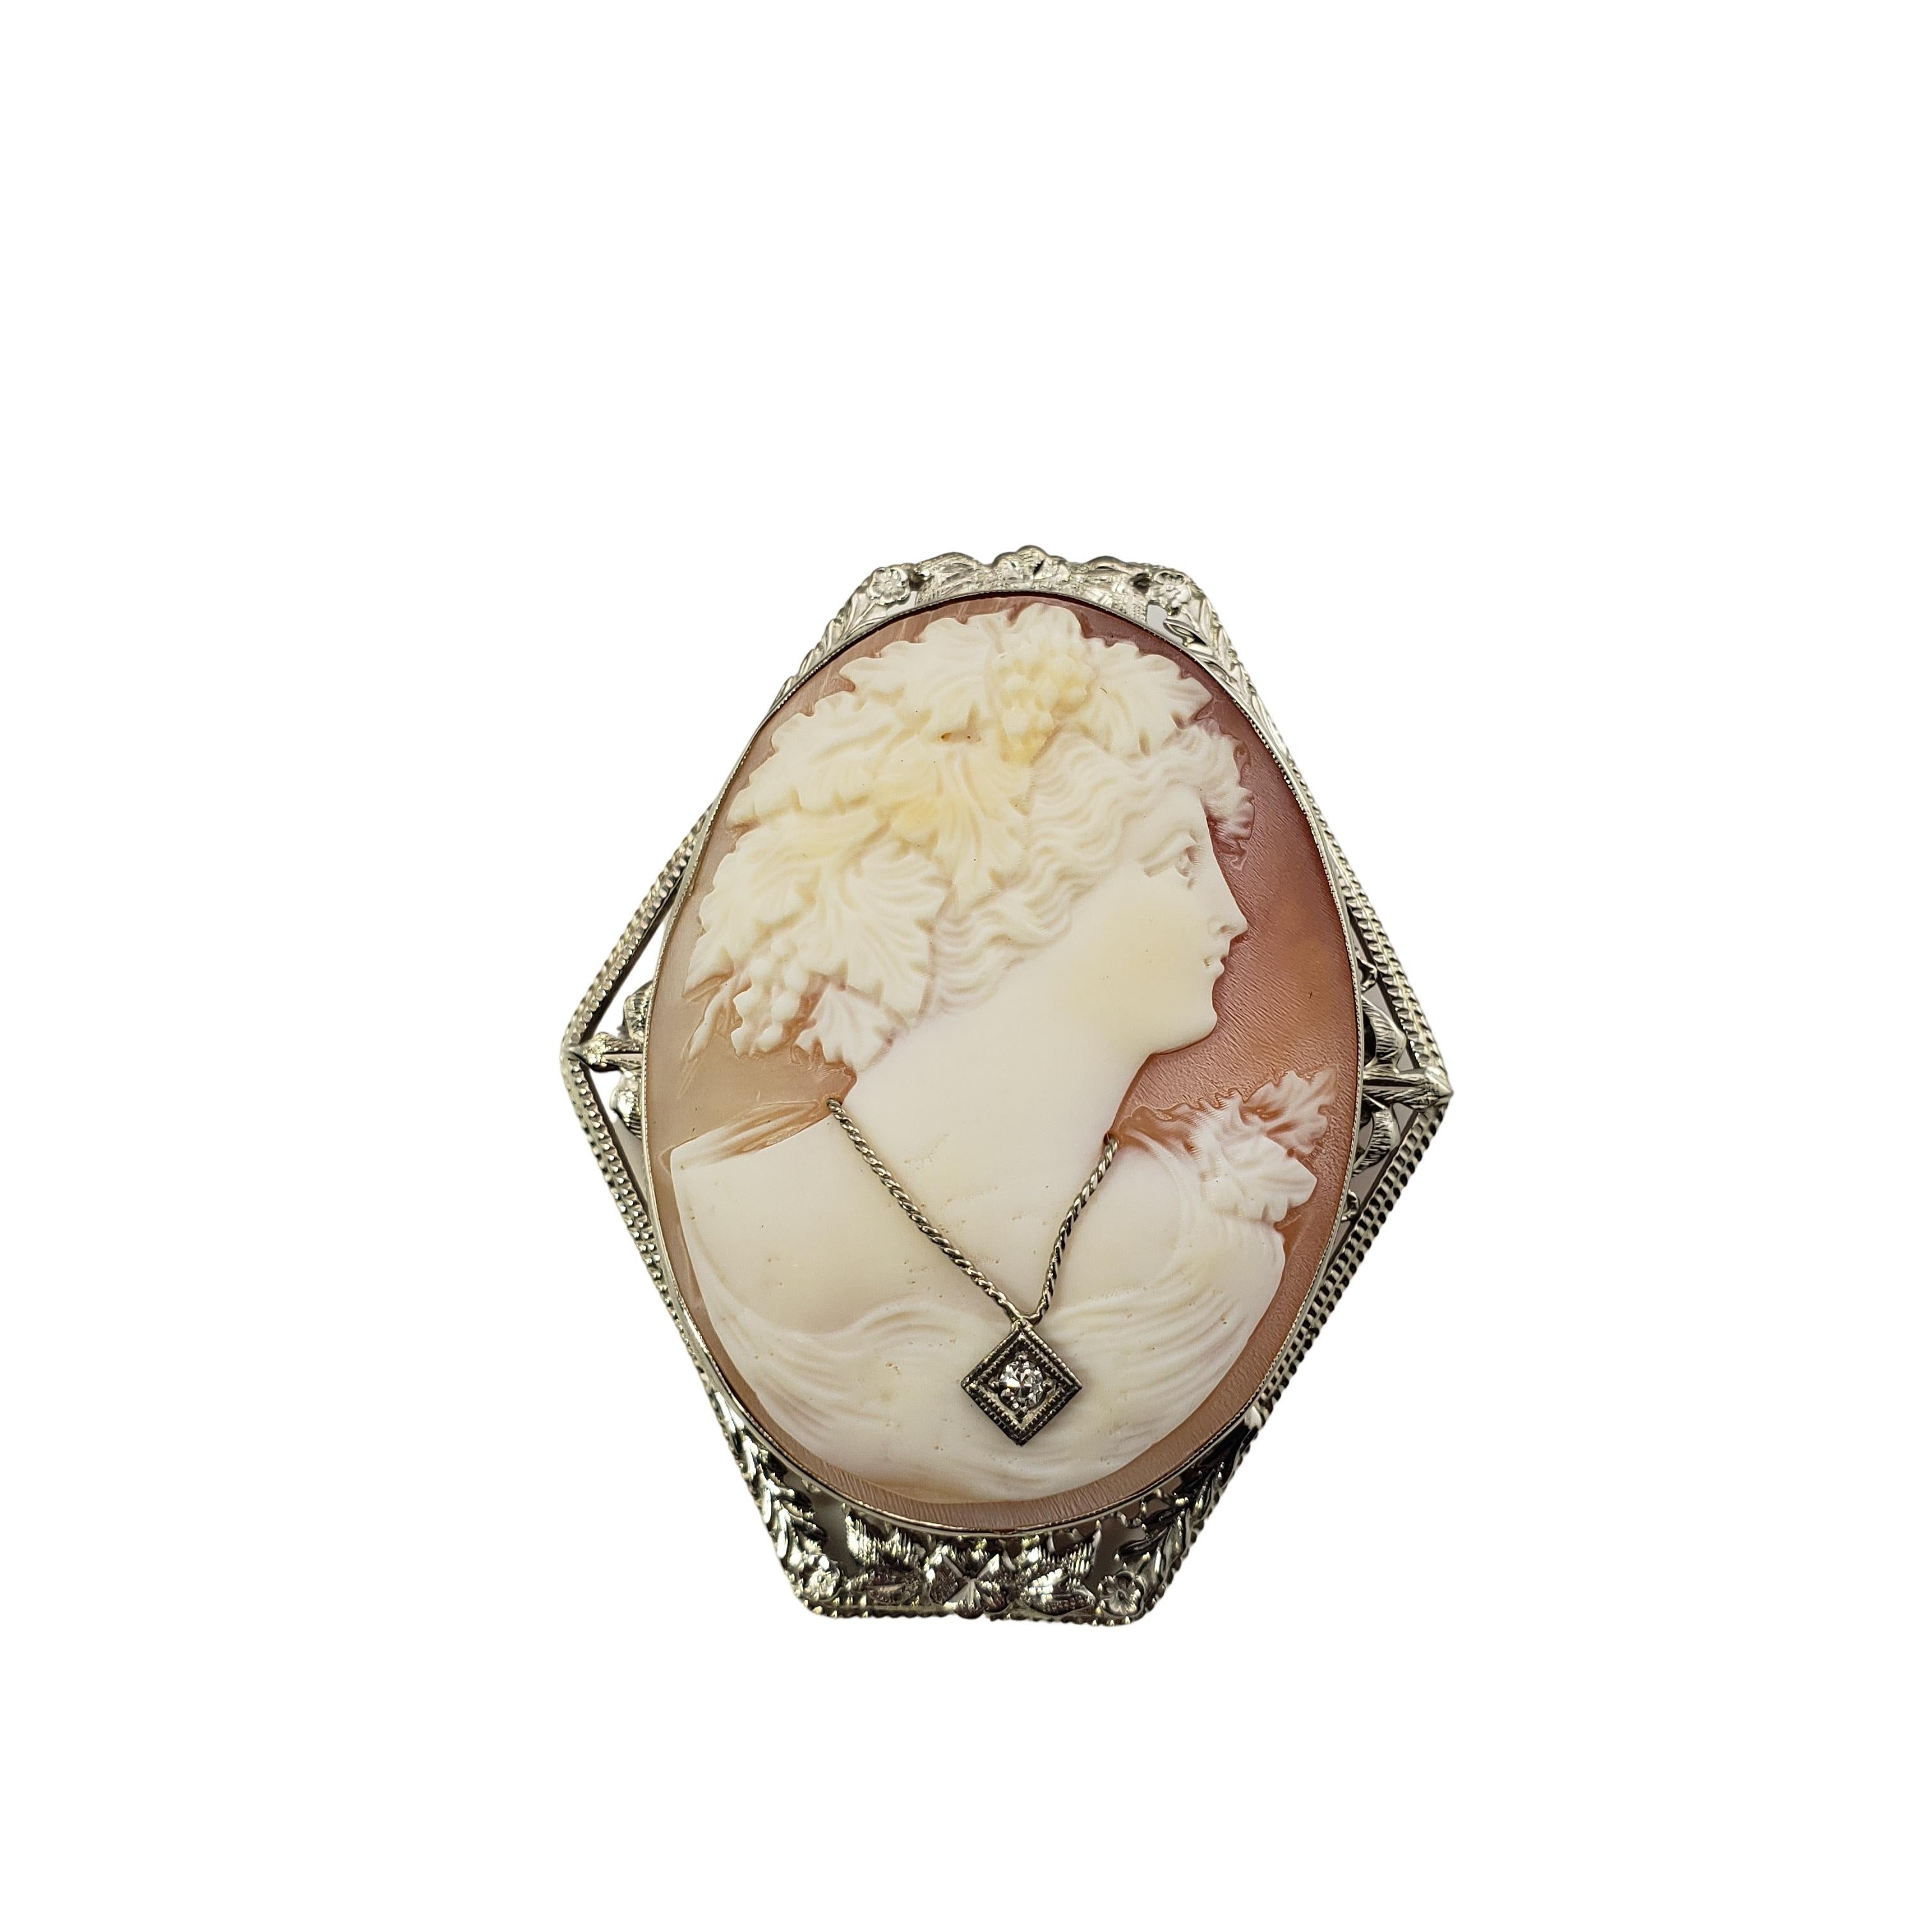 14 Karat White Gold and Diamond Cameo Brooch/Pendant For Sale 2